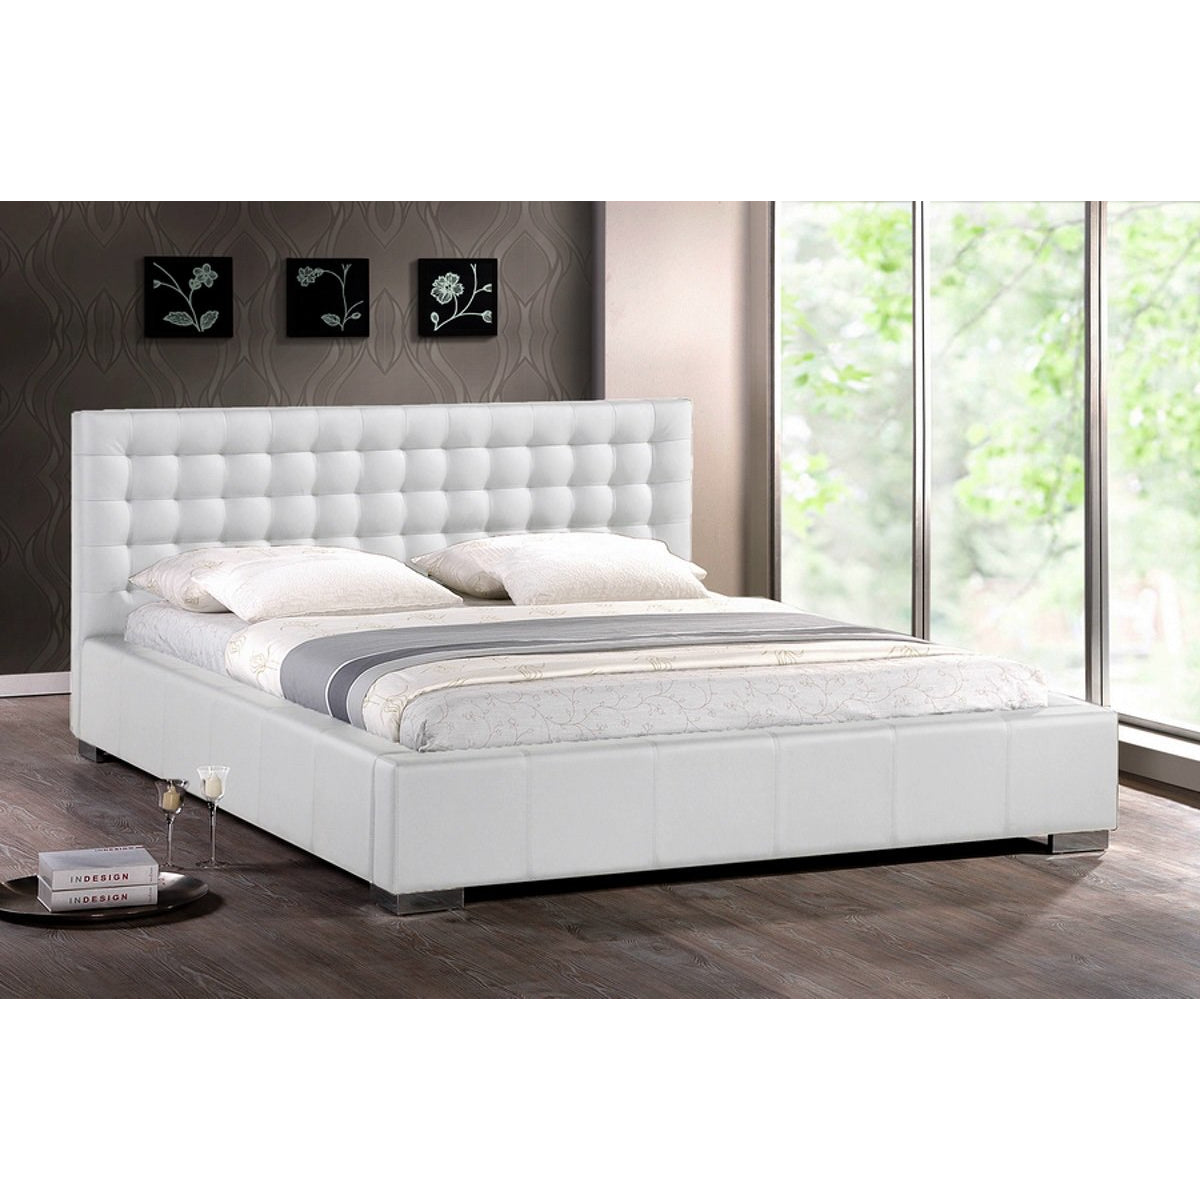 Baxton Studio Madison White Modern Bed with Upholstered Headboard (Queen Size) Baxton Studio-beds-Minimal And Modern - 1